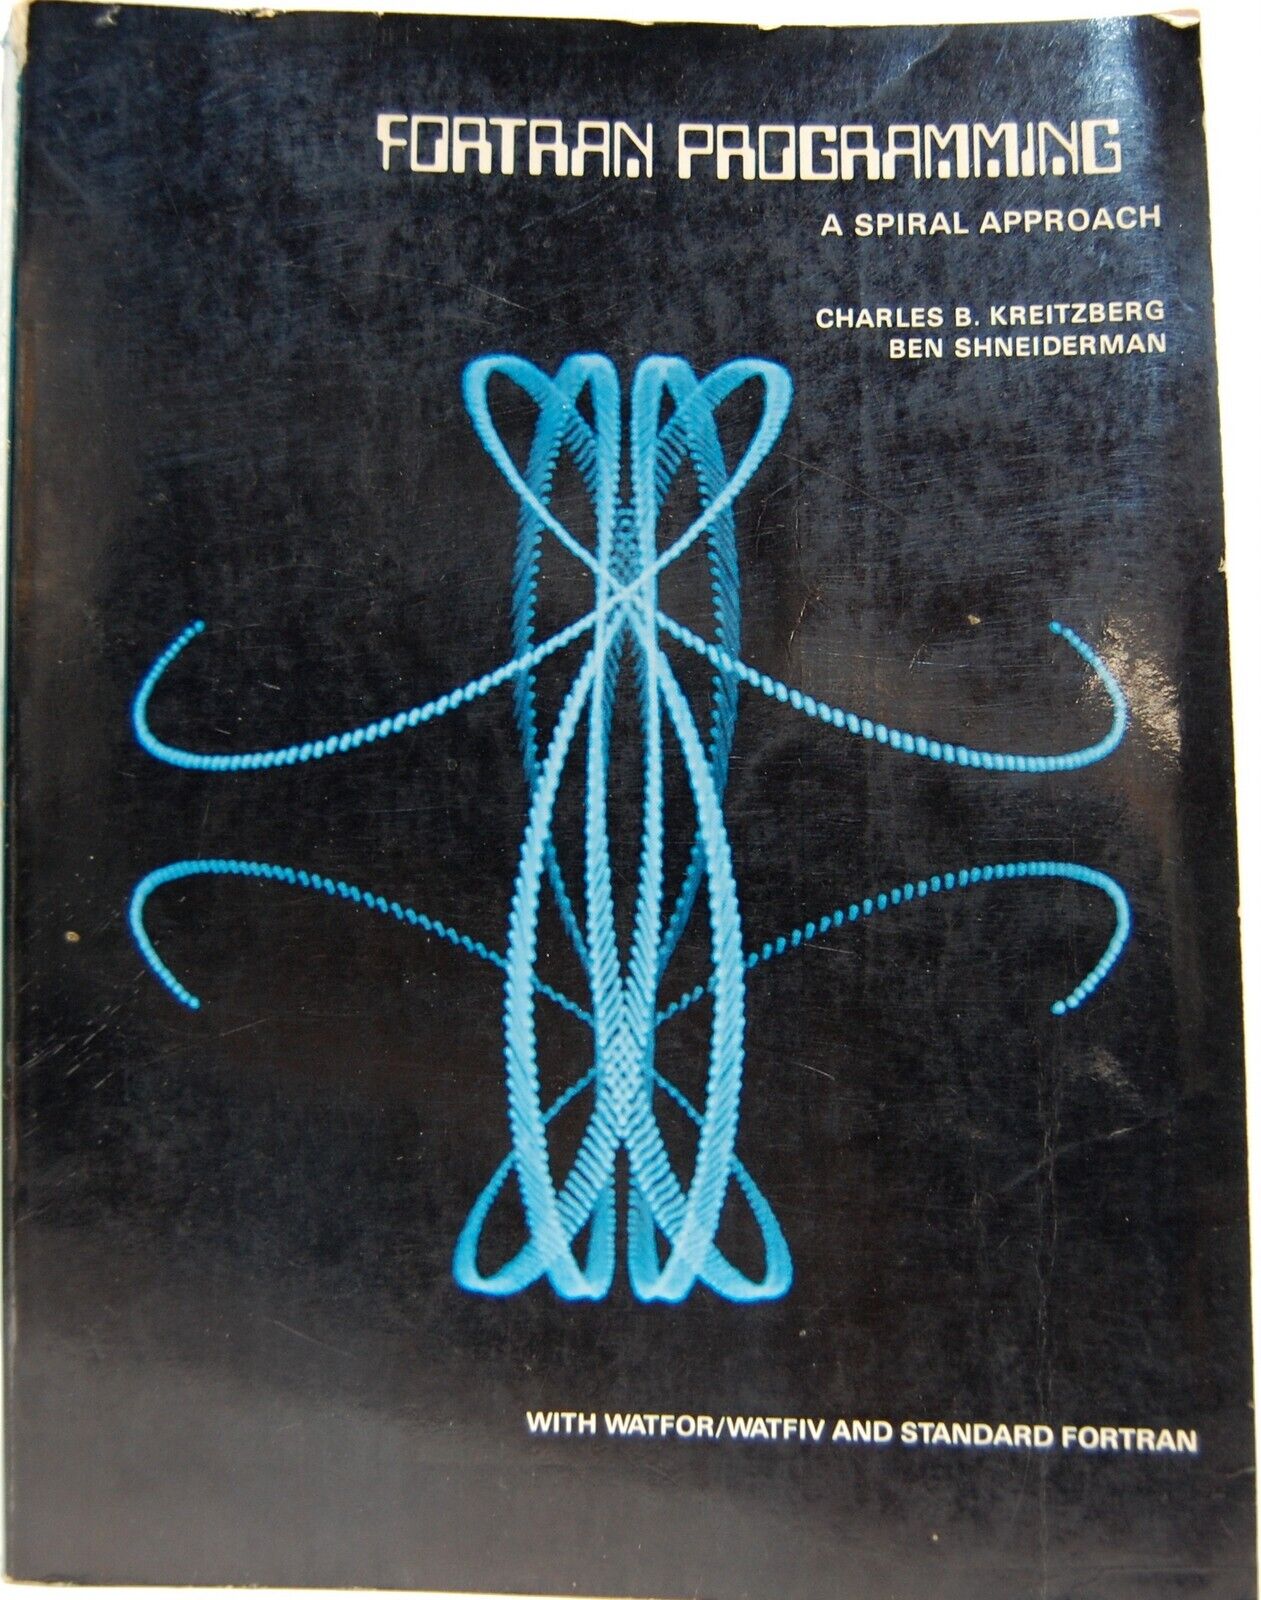 1975 Fortran Programming a Spiral Approach 437 Page Book